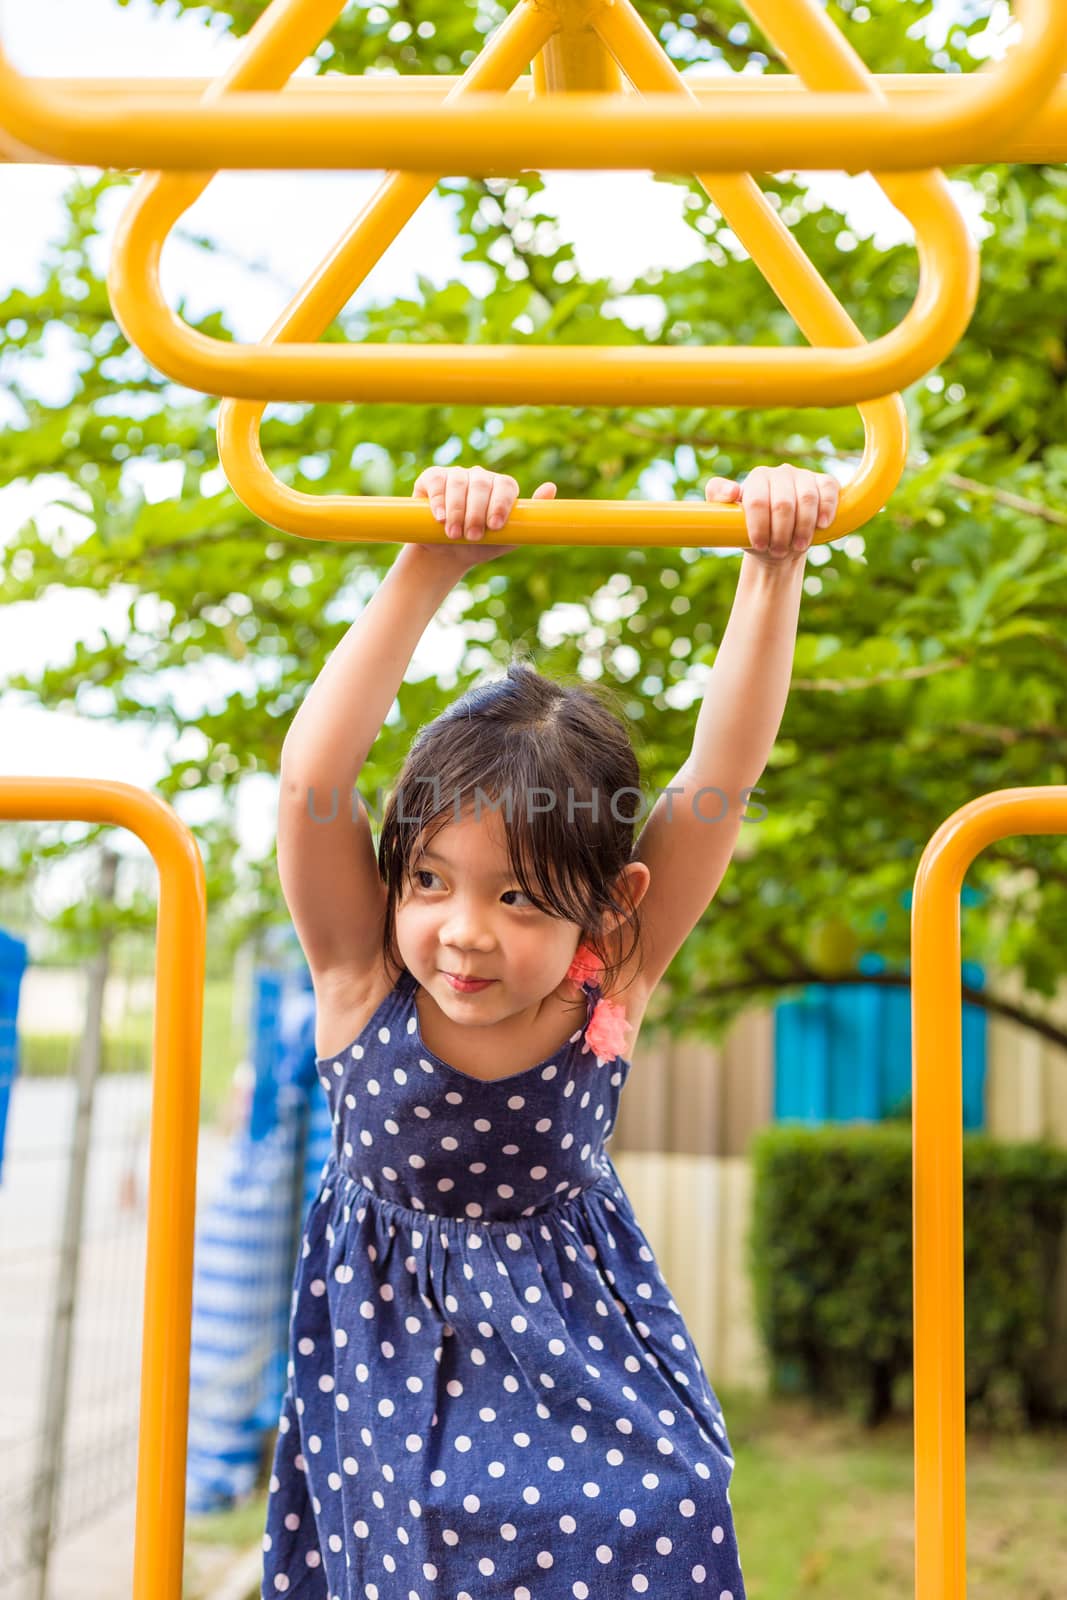 Young girl playing outdoor equipment with happiness.